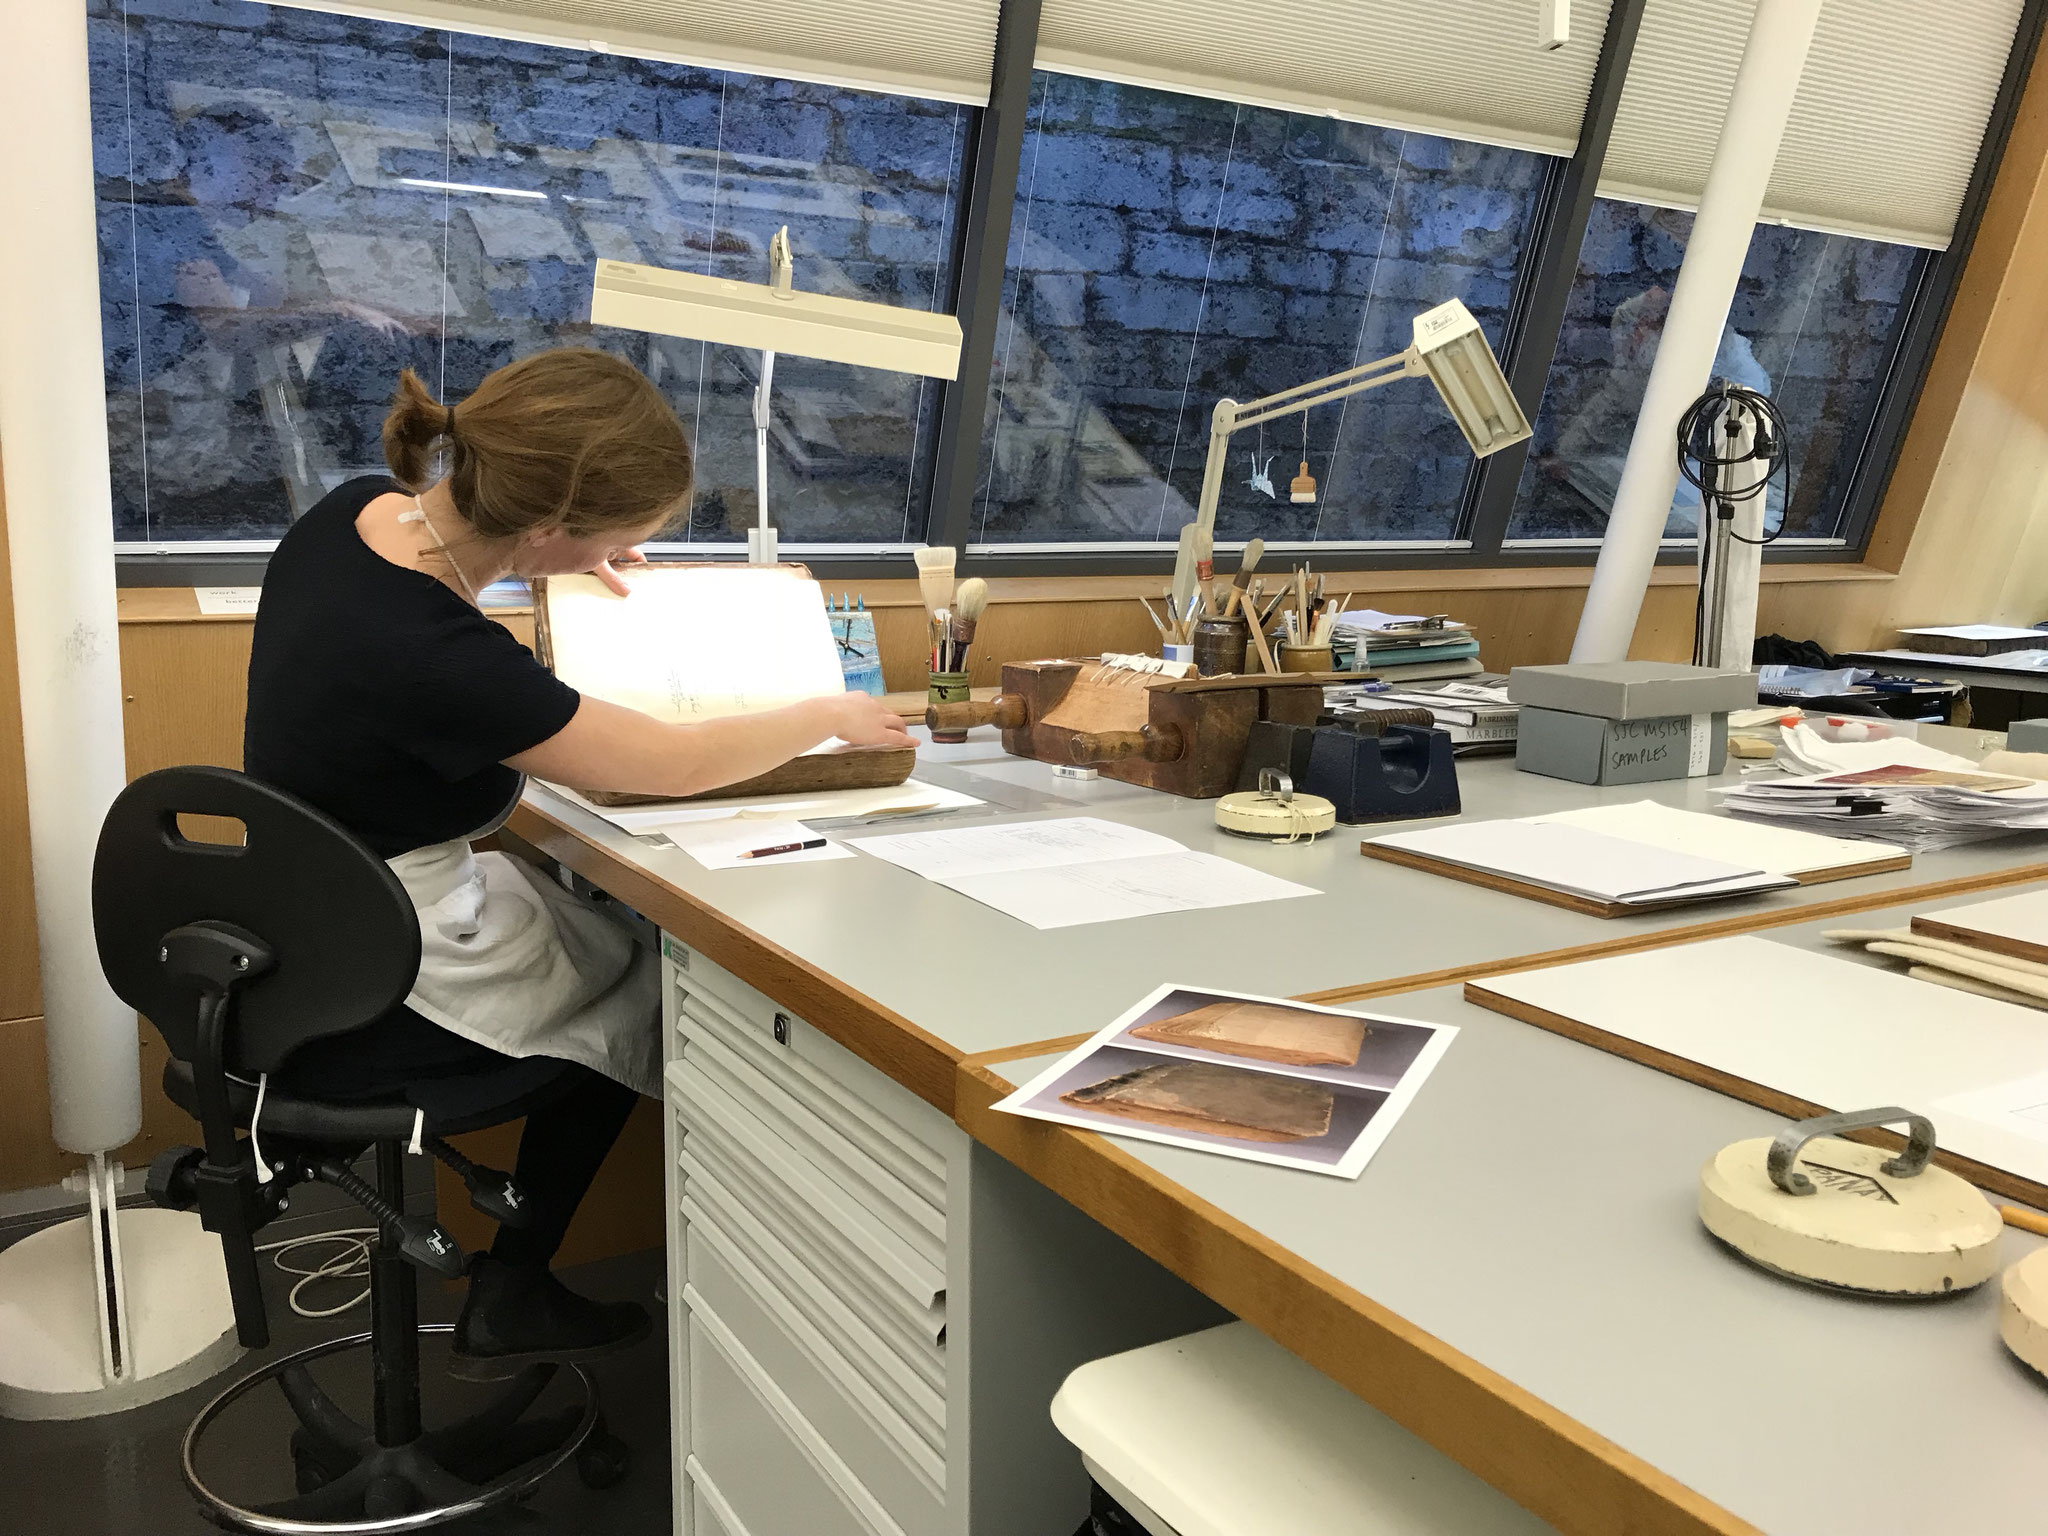 Conservator try to bring the book back in a good form